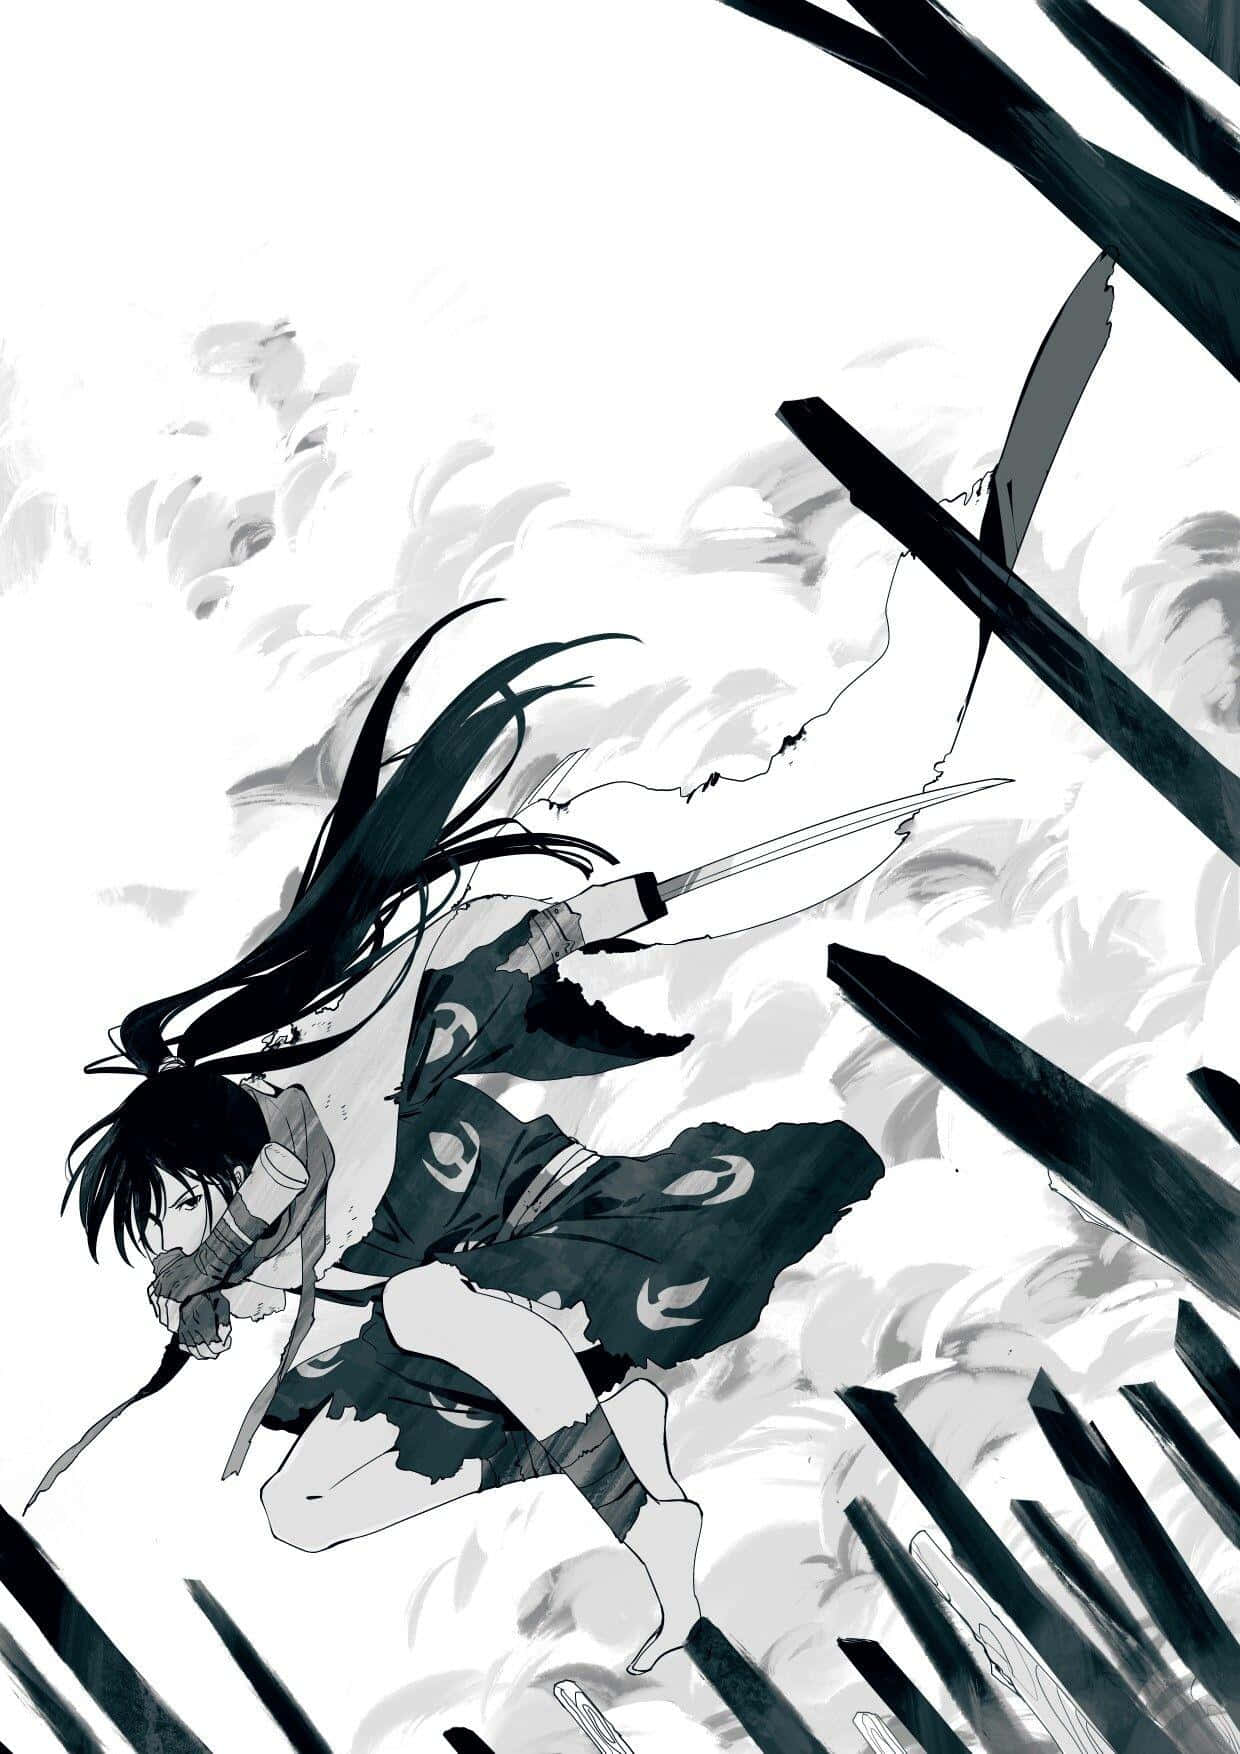 The classic battle between good and evil takes on a shocking twist in Dororo